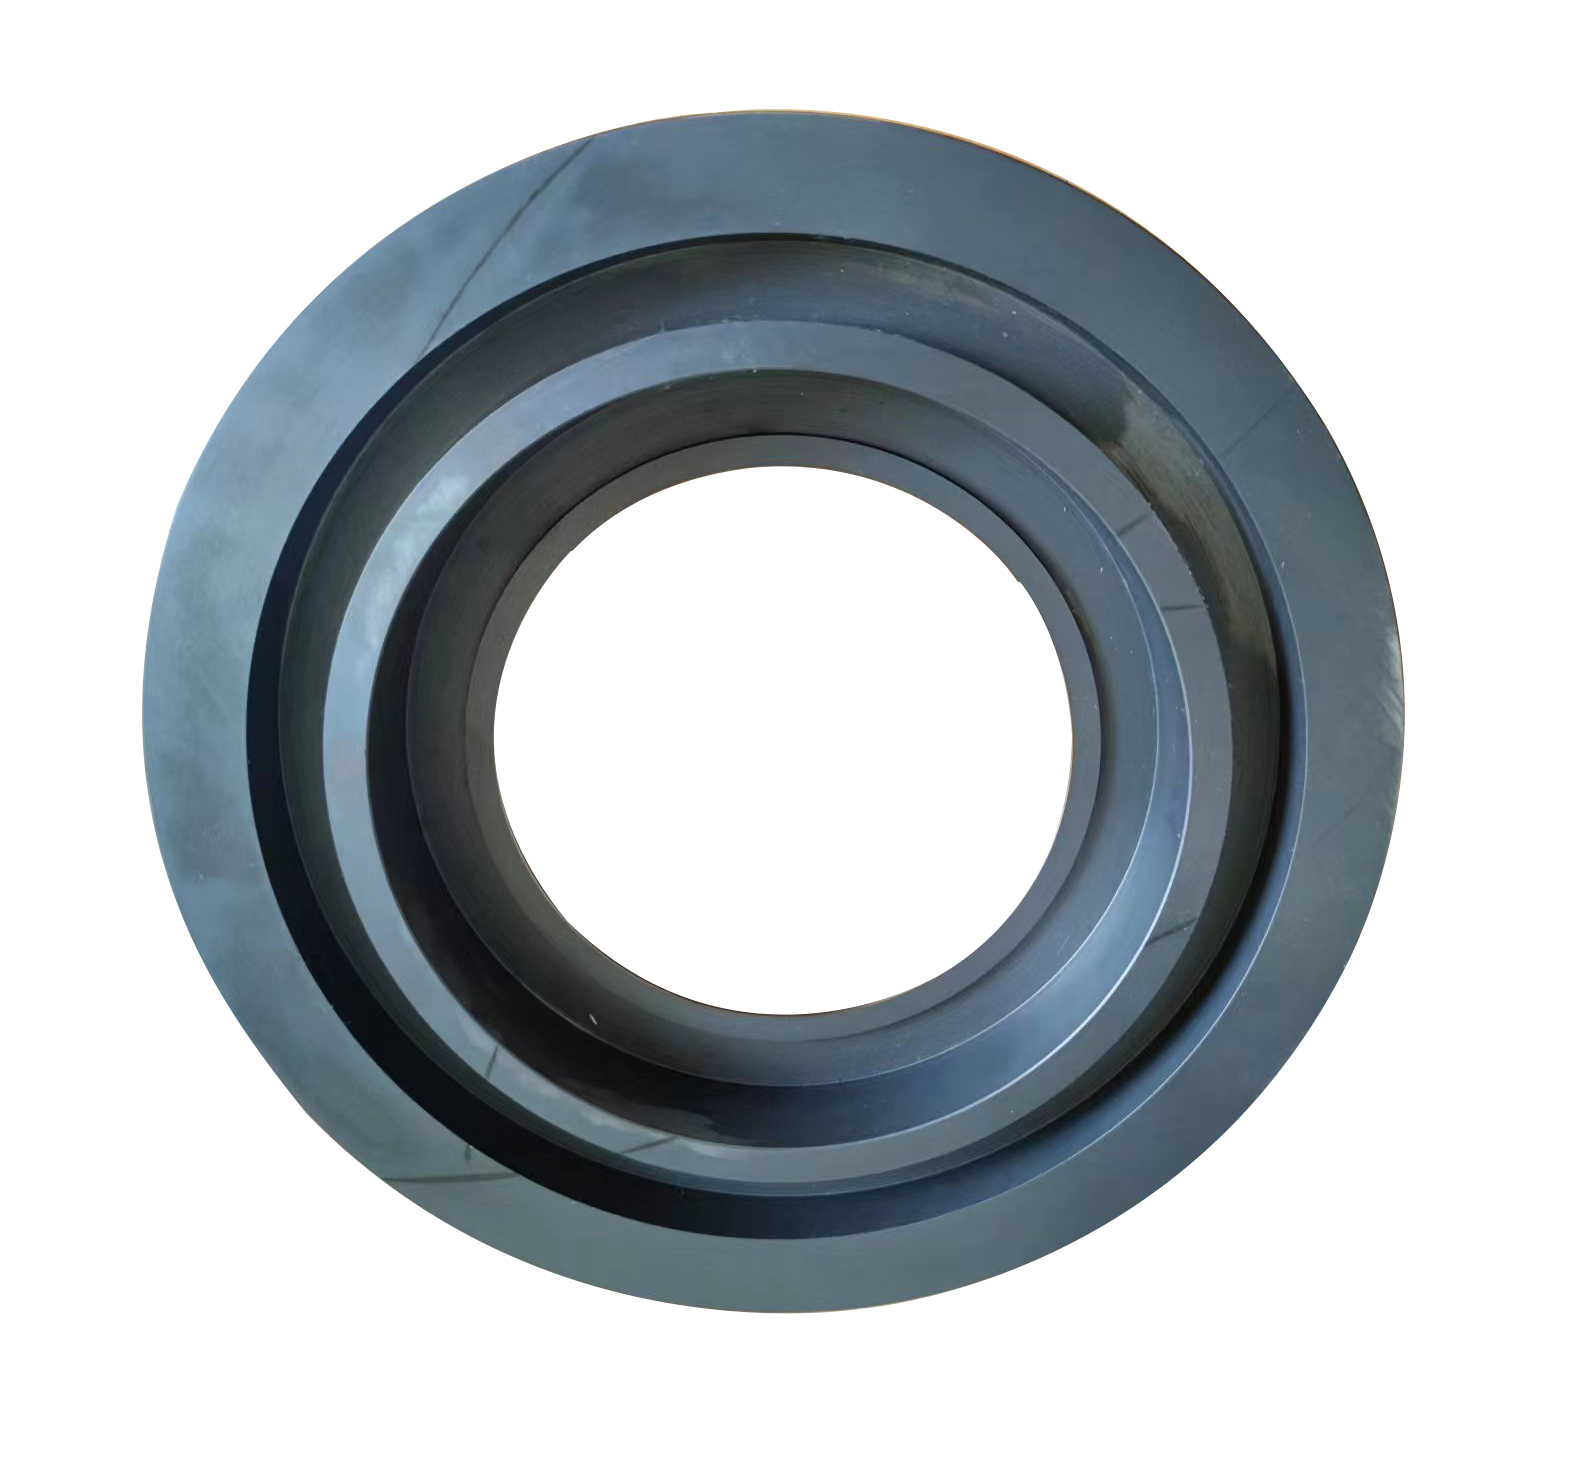 Stainless steel non-standard flange parts